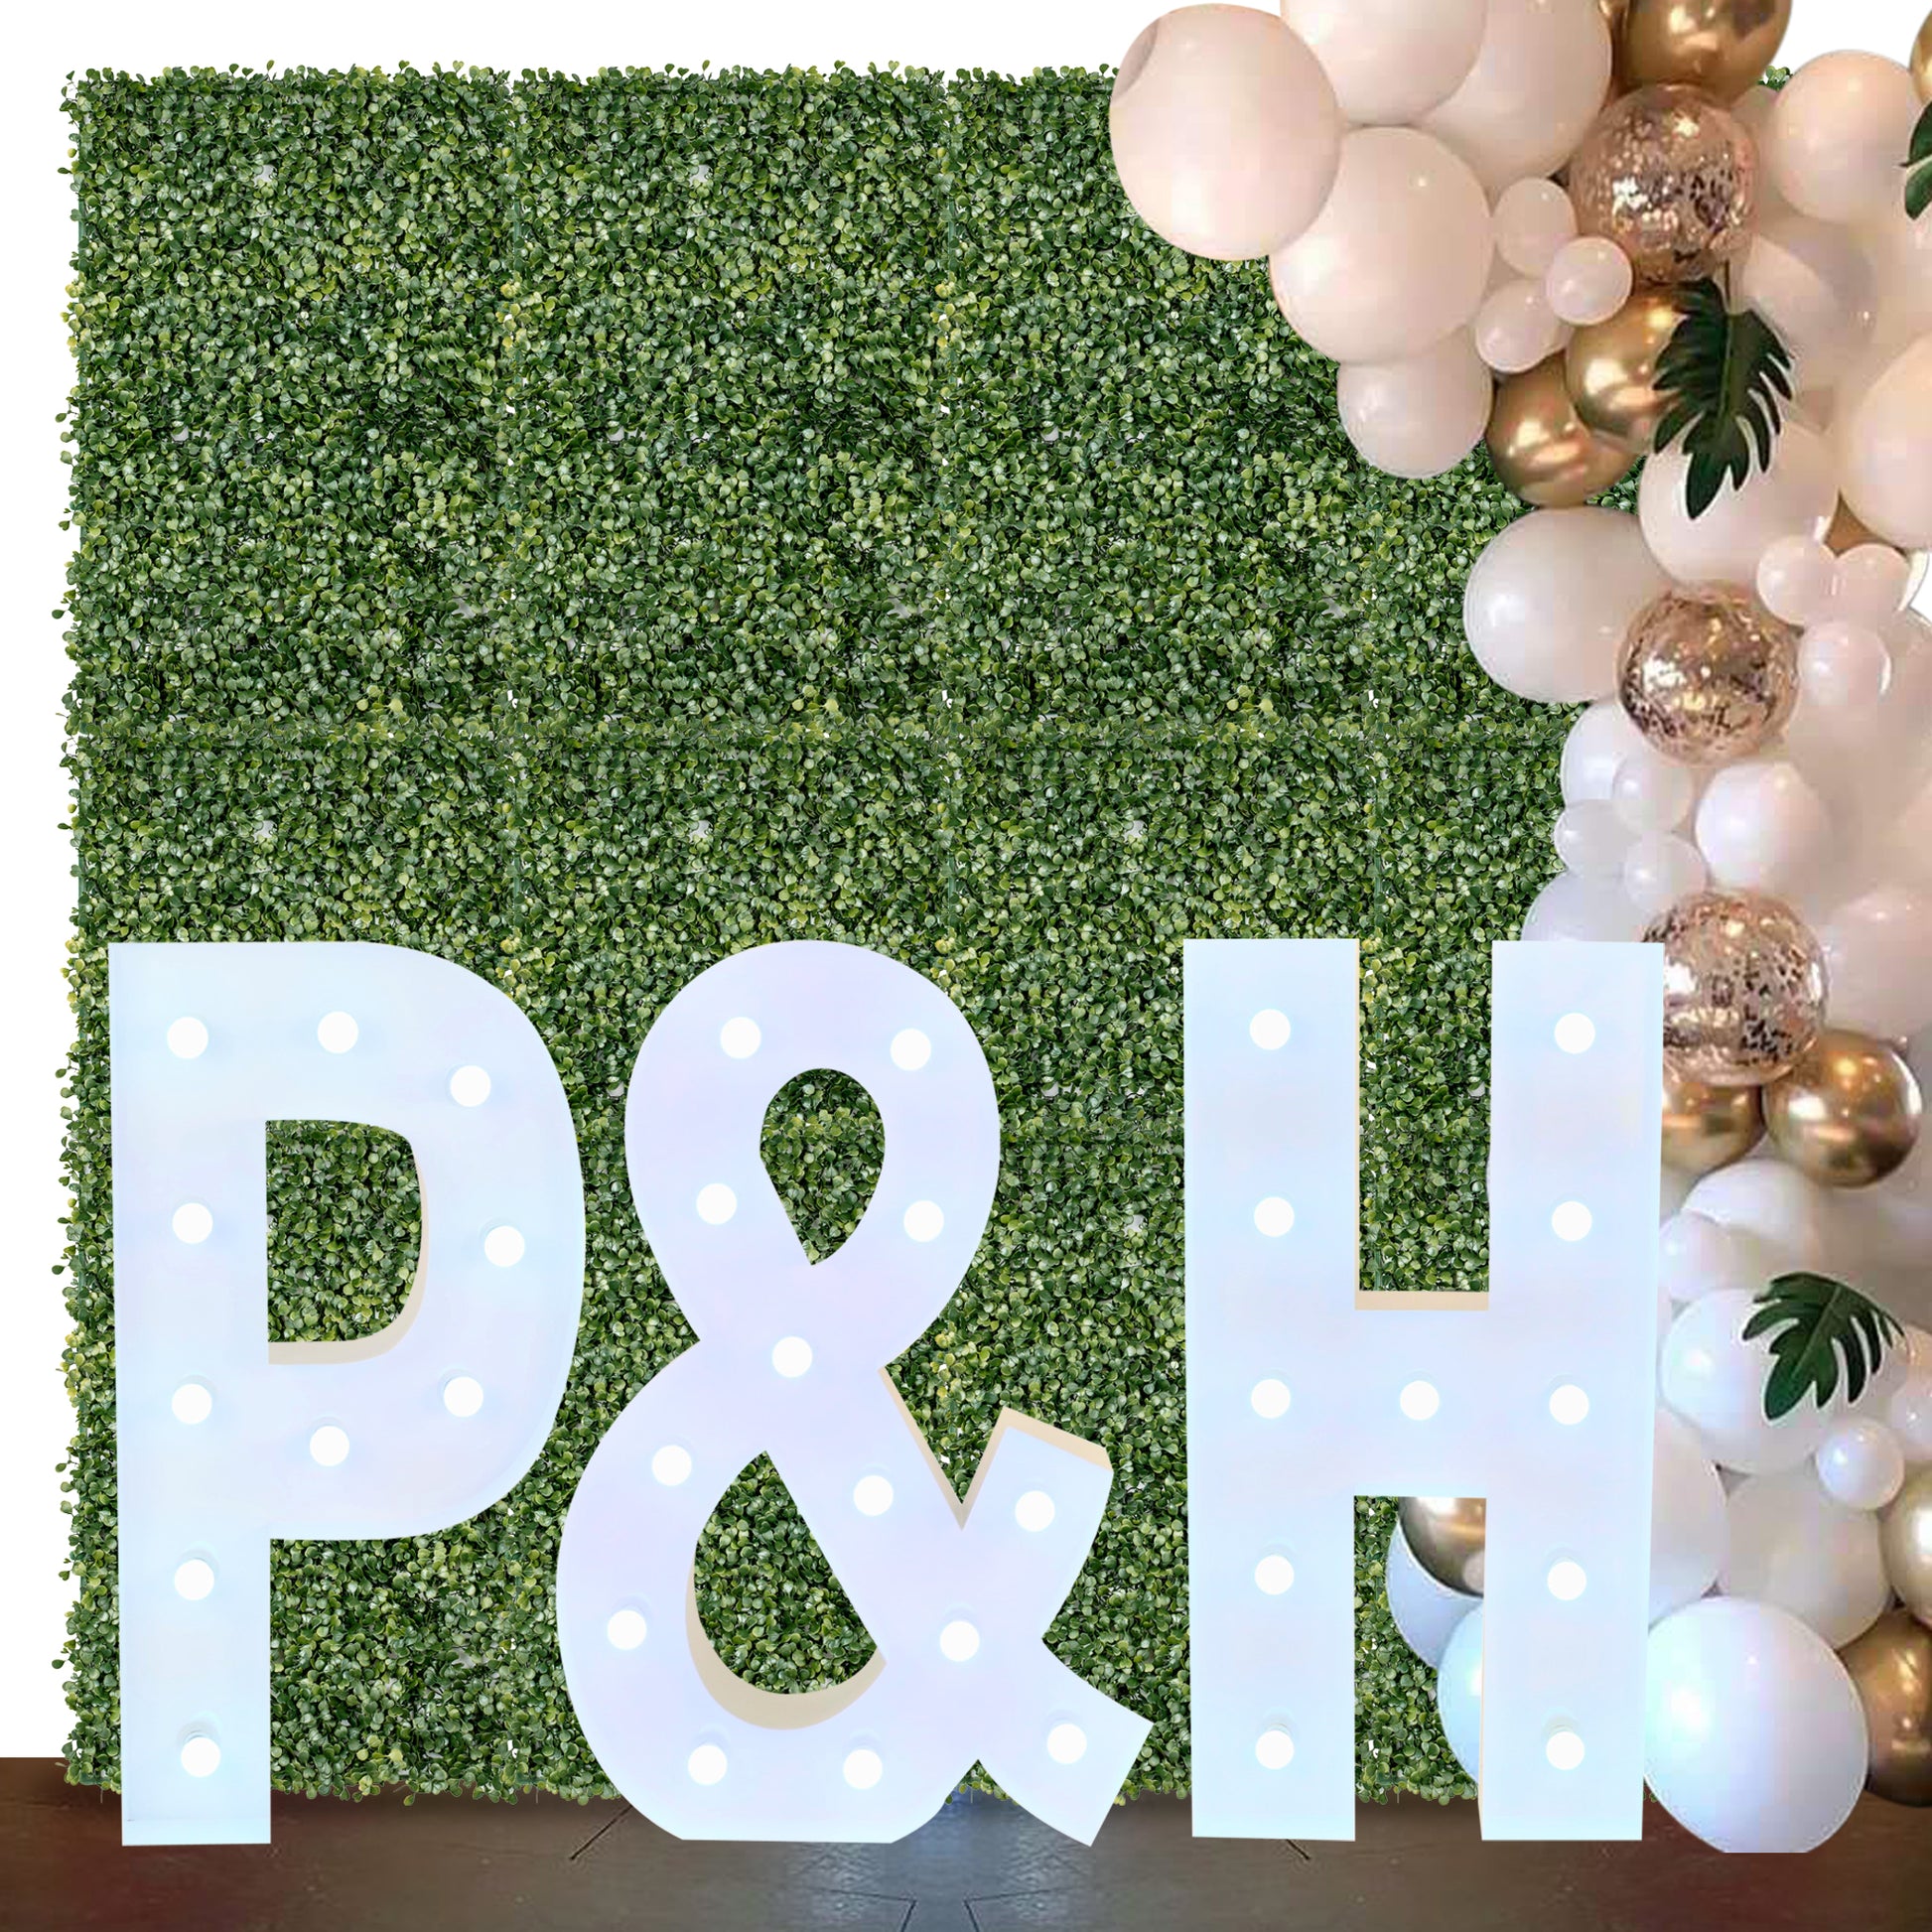 Large 4ft Tall LED Marquee Letter - P